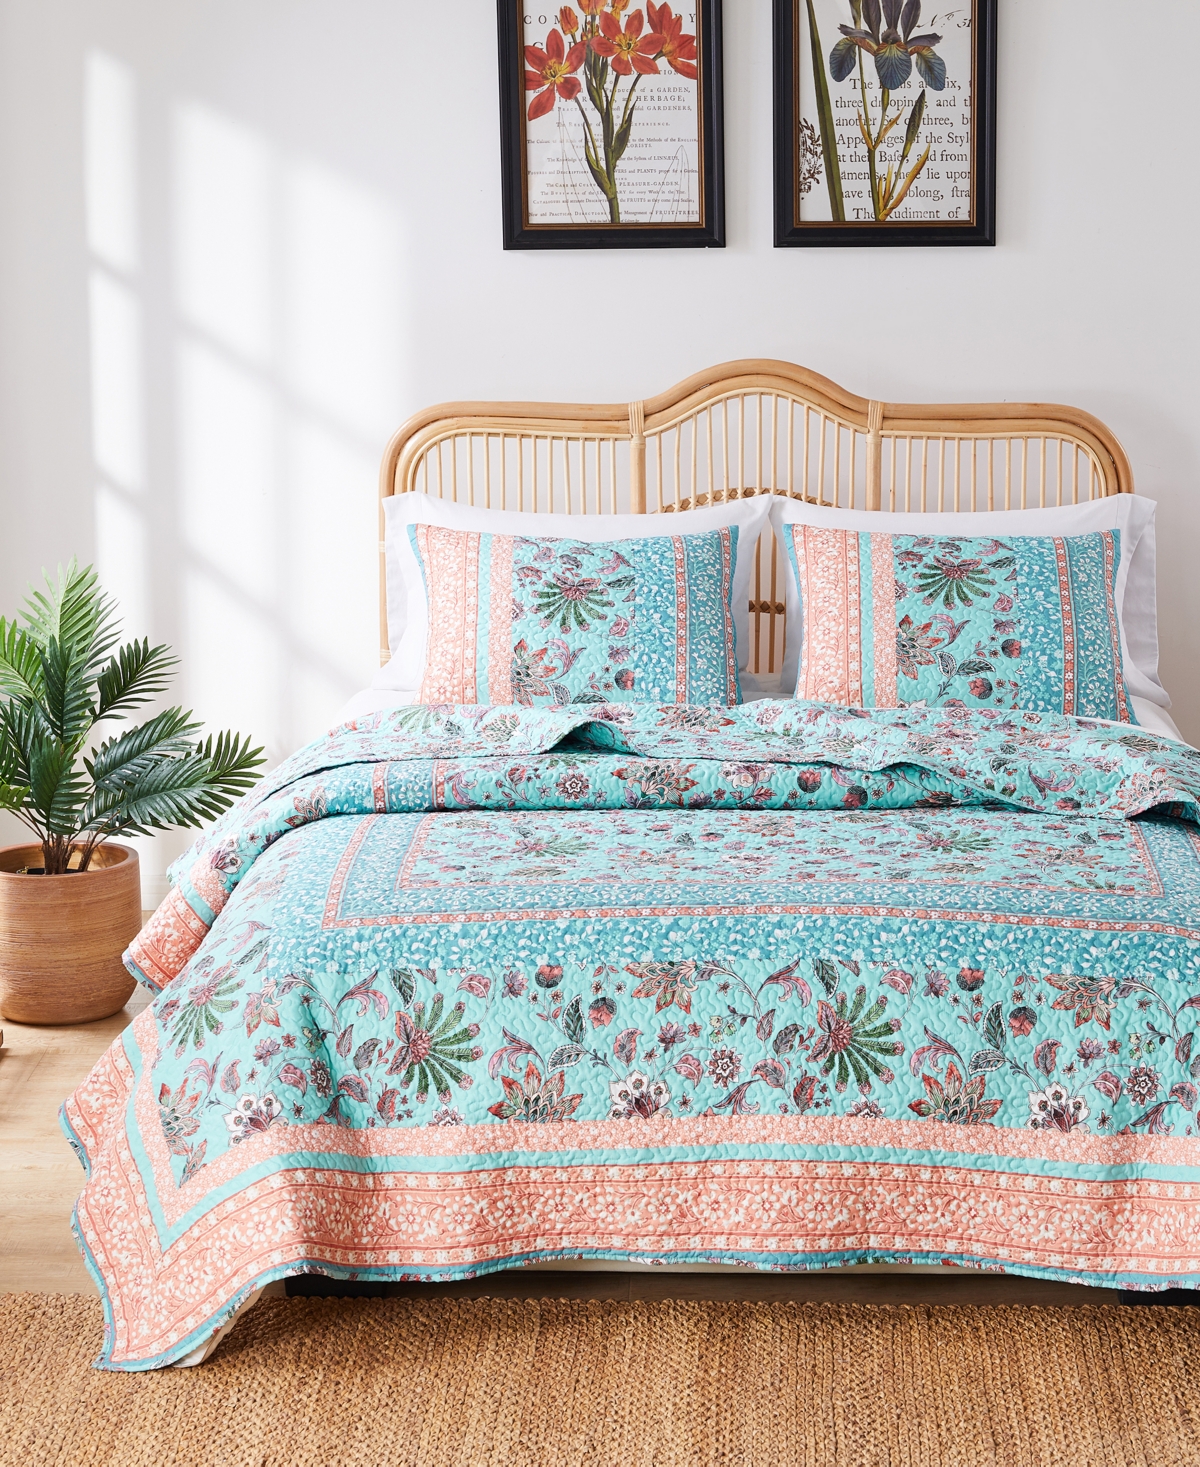 Greenland Home Fashions Audrey Floral Print 2 Piece Quilt Set, Twin/xl In Turquoise